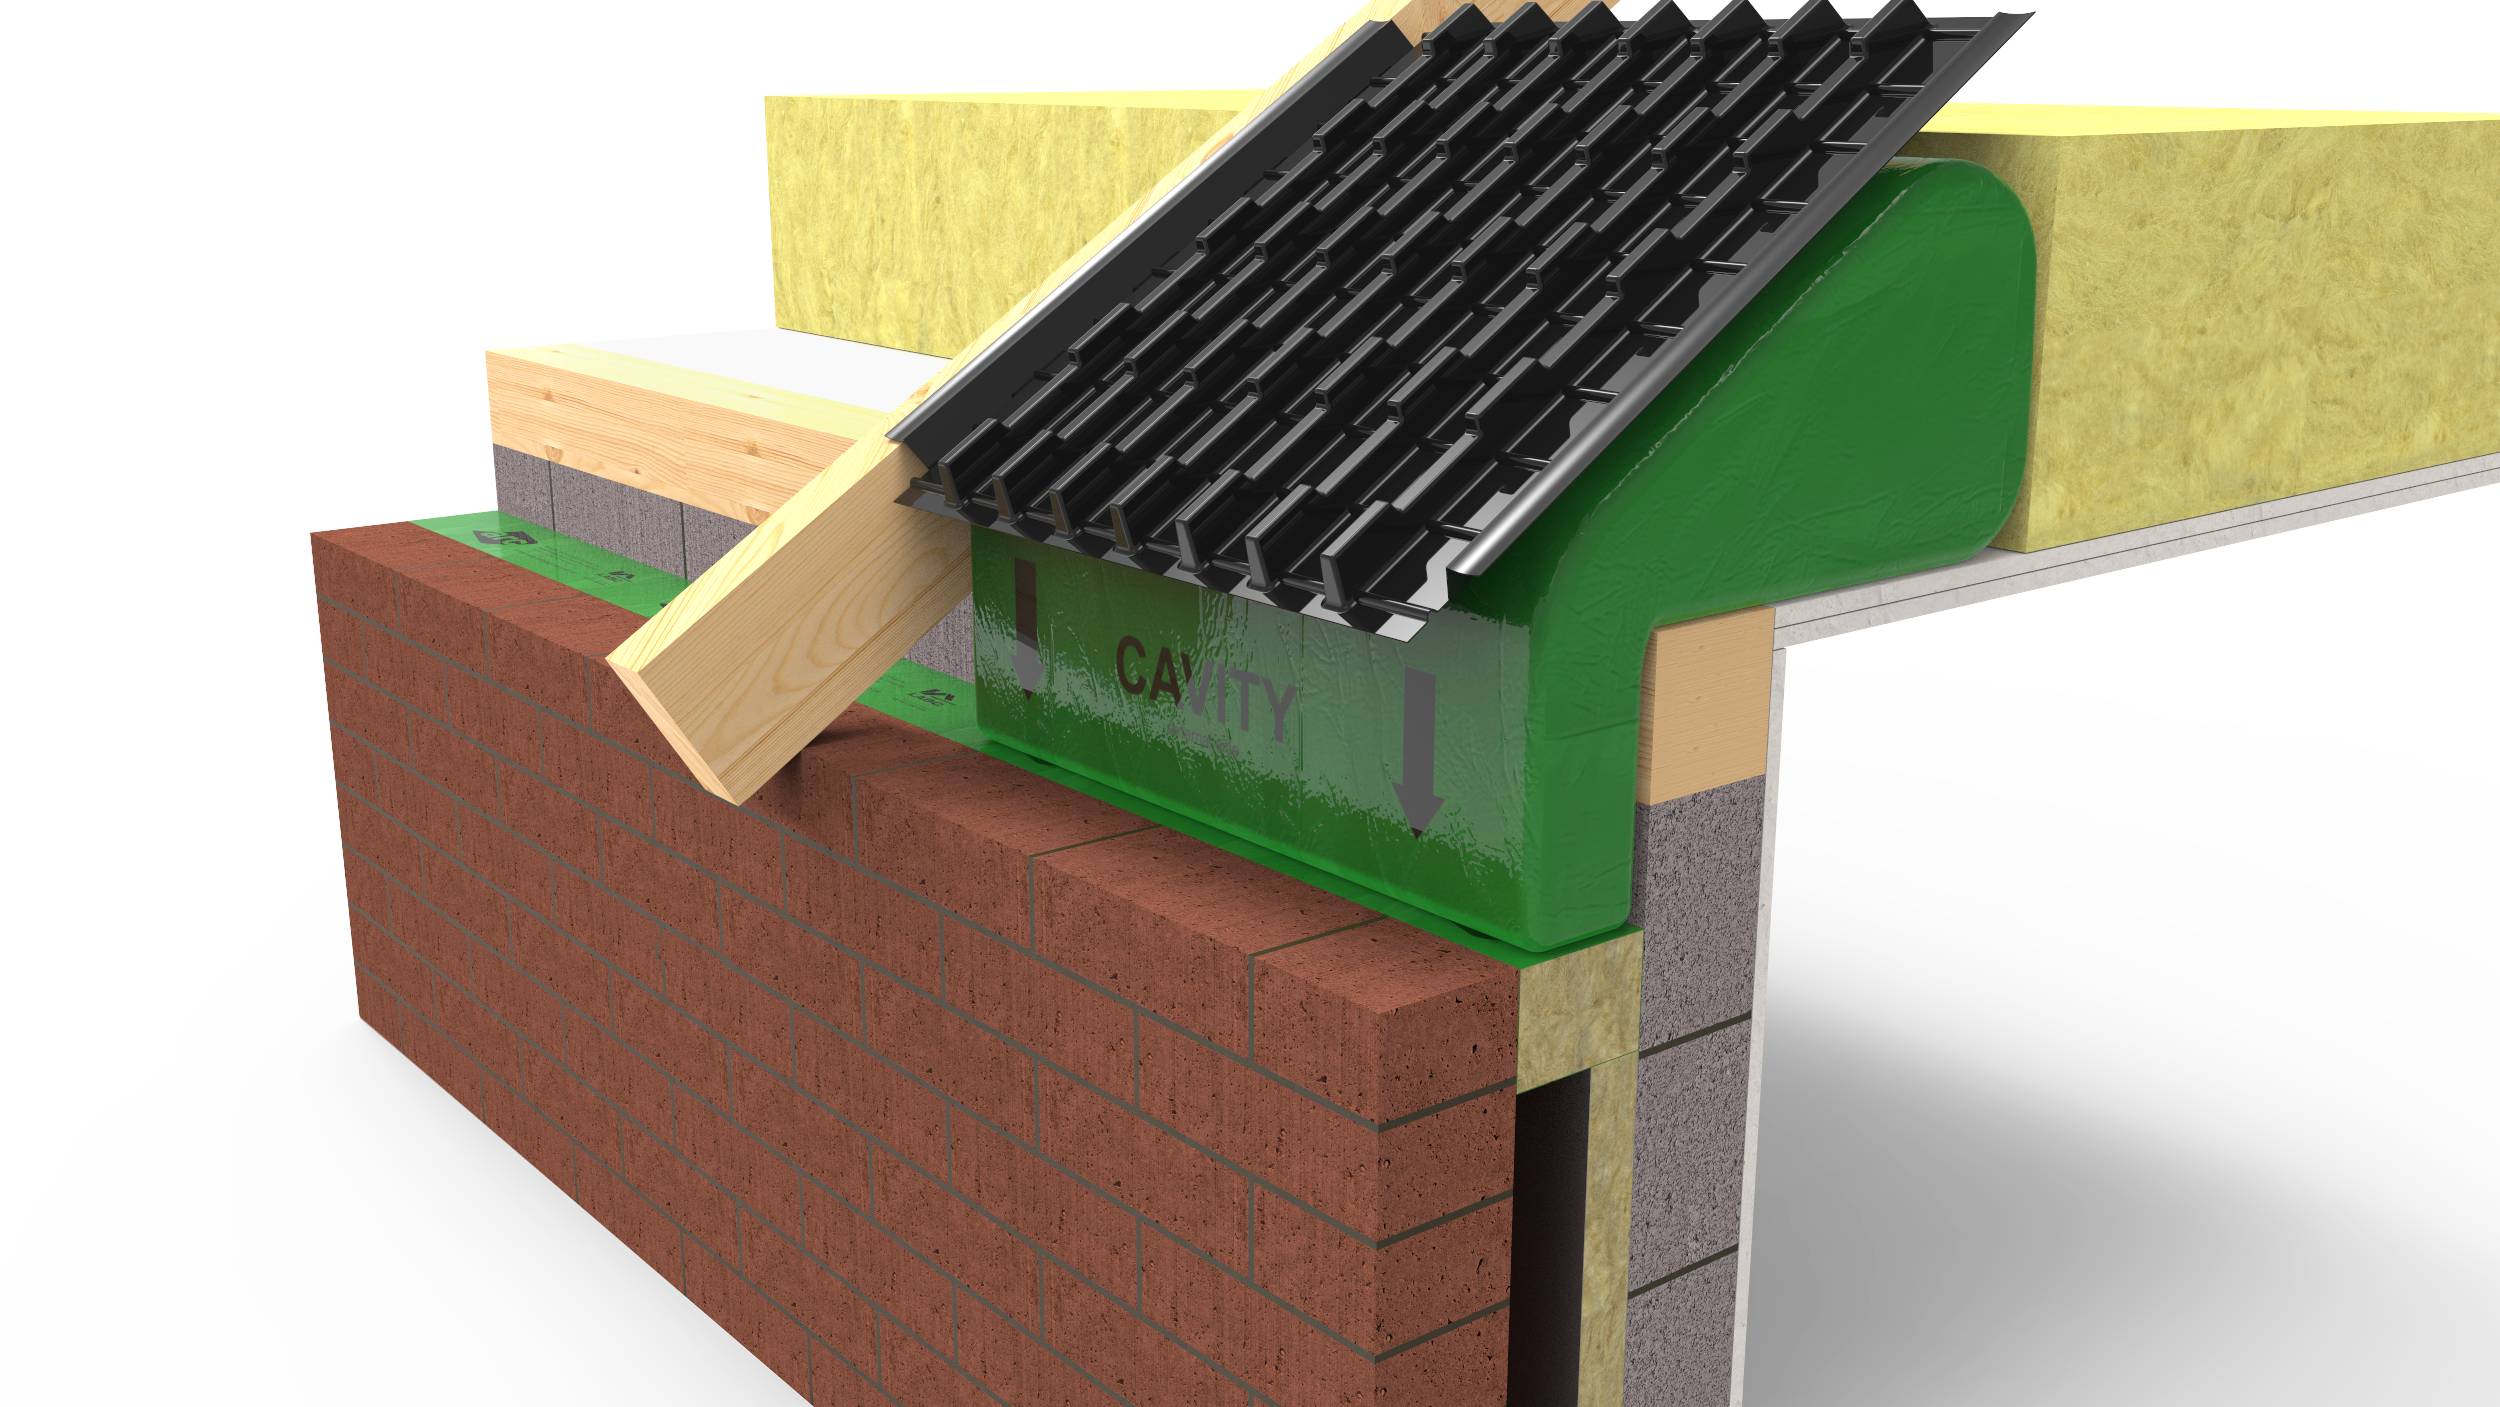 Eaves Insulator - Non-combustible thermal insulation